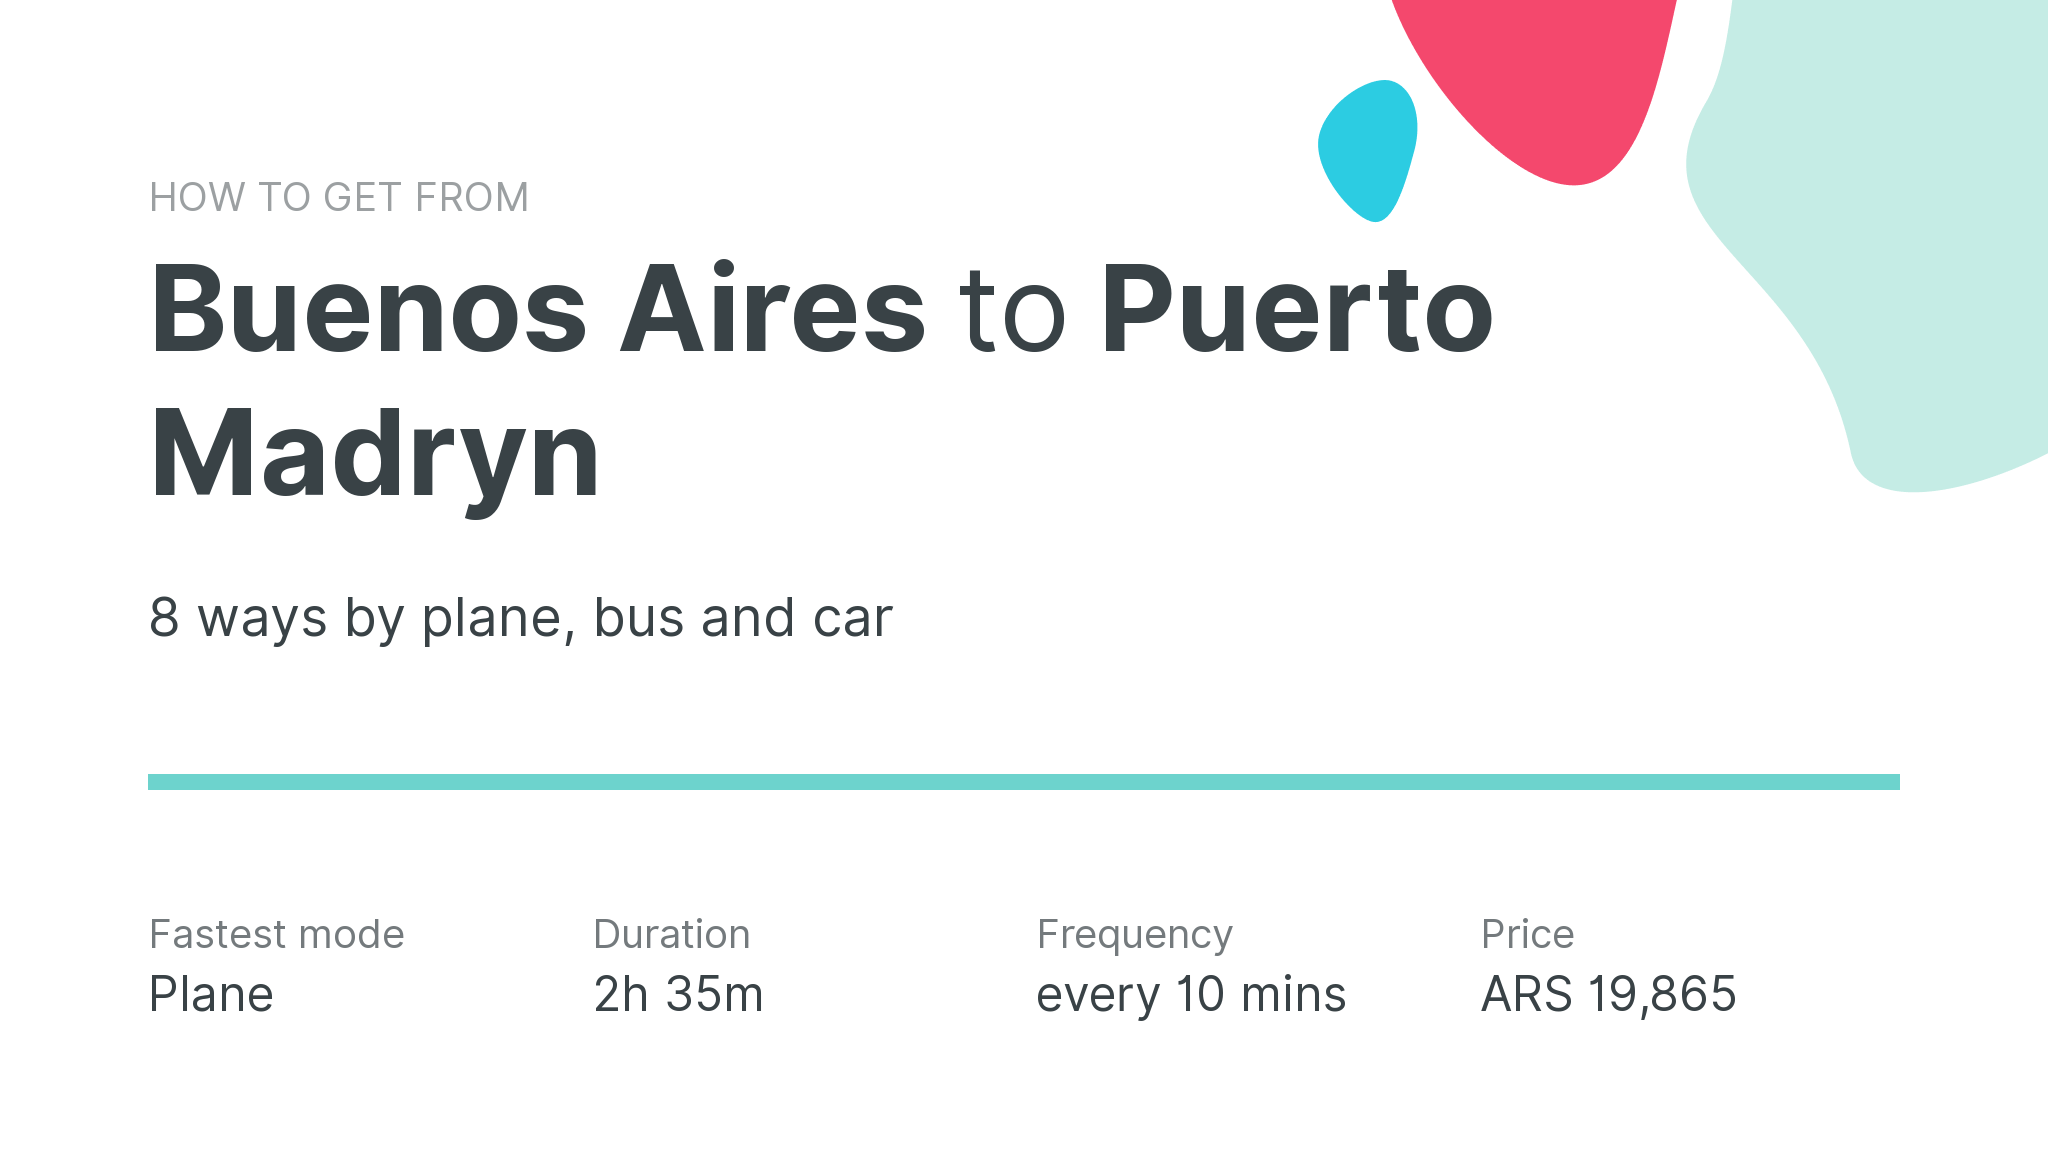 How do I get from Buenos Aires to Puerto Madryn